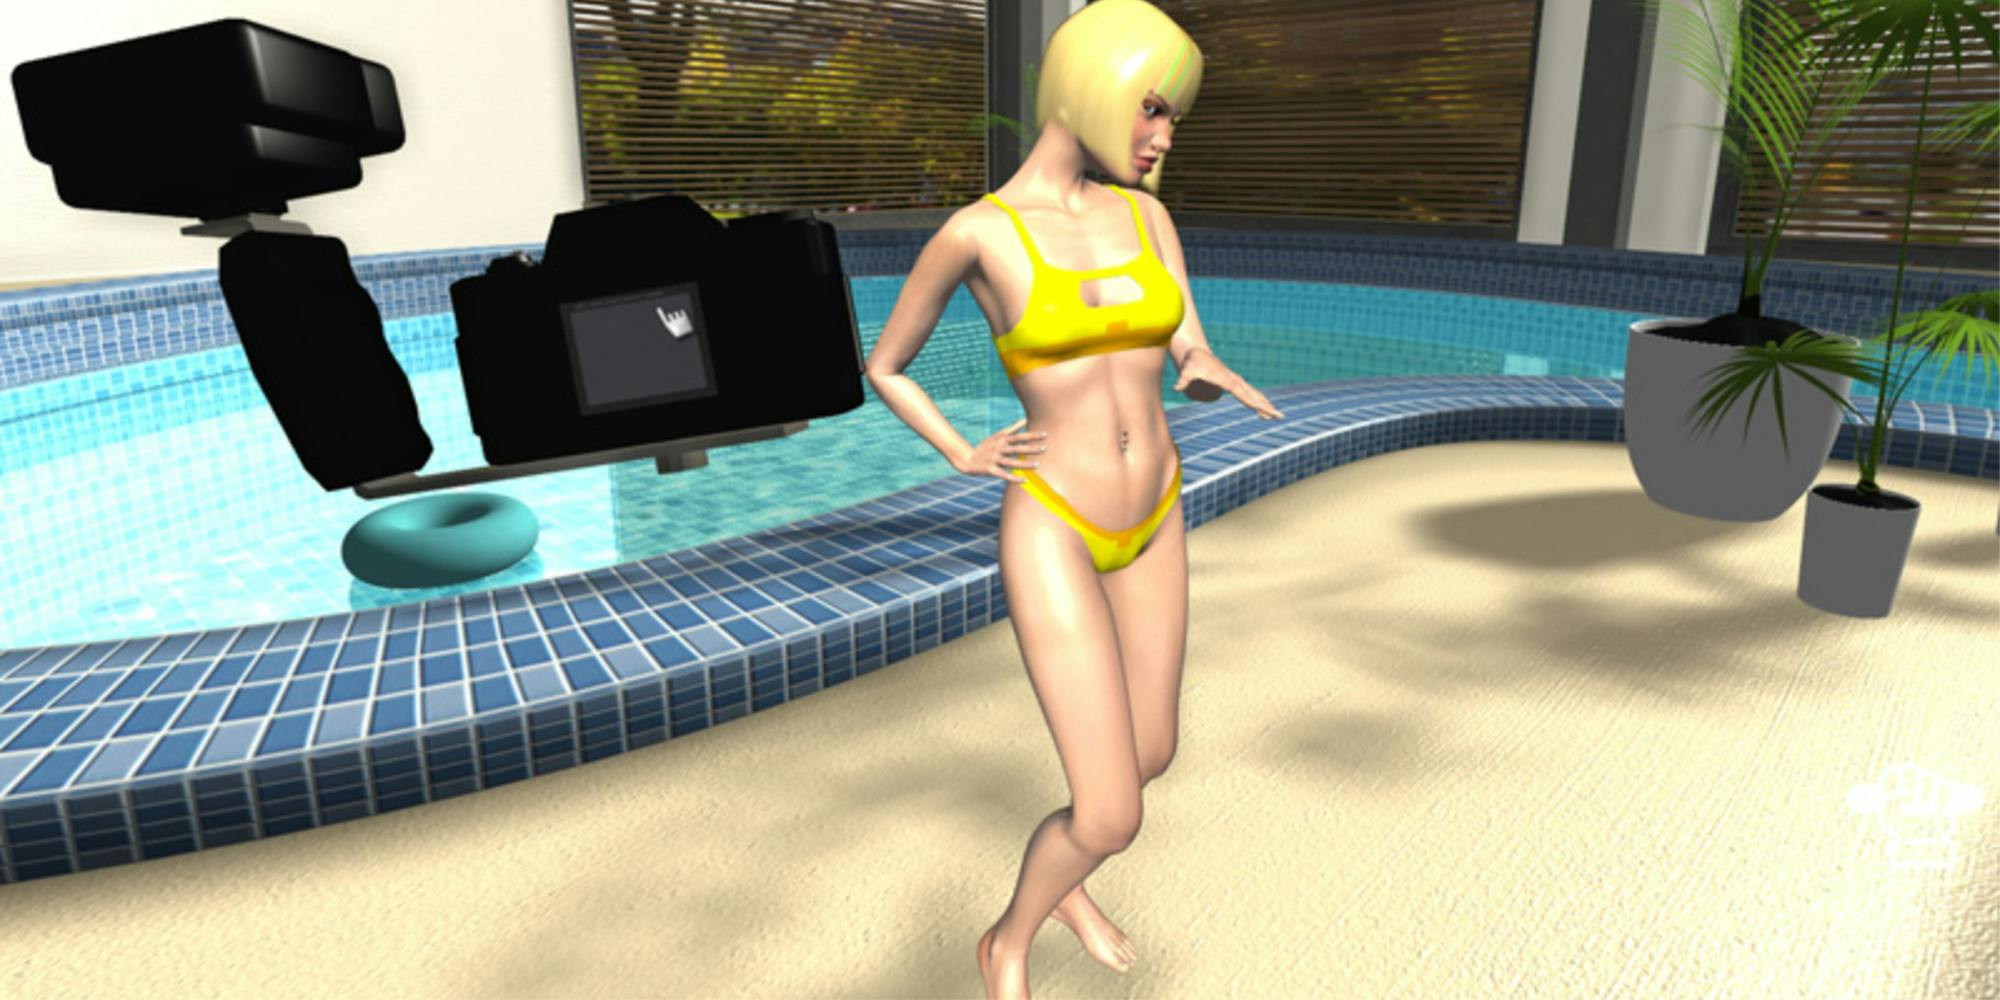 XStoryPlayer character poses by the pool while the player uses a camera.